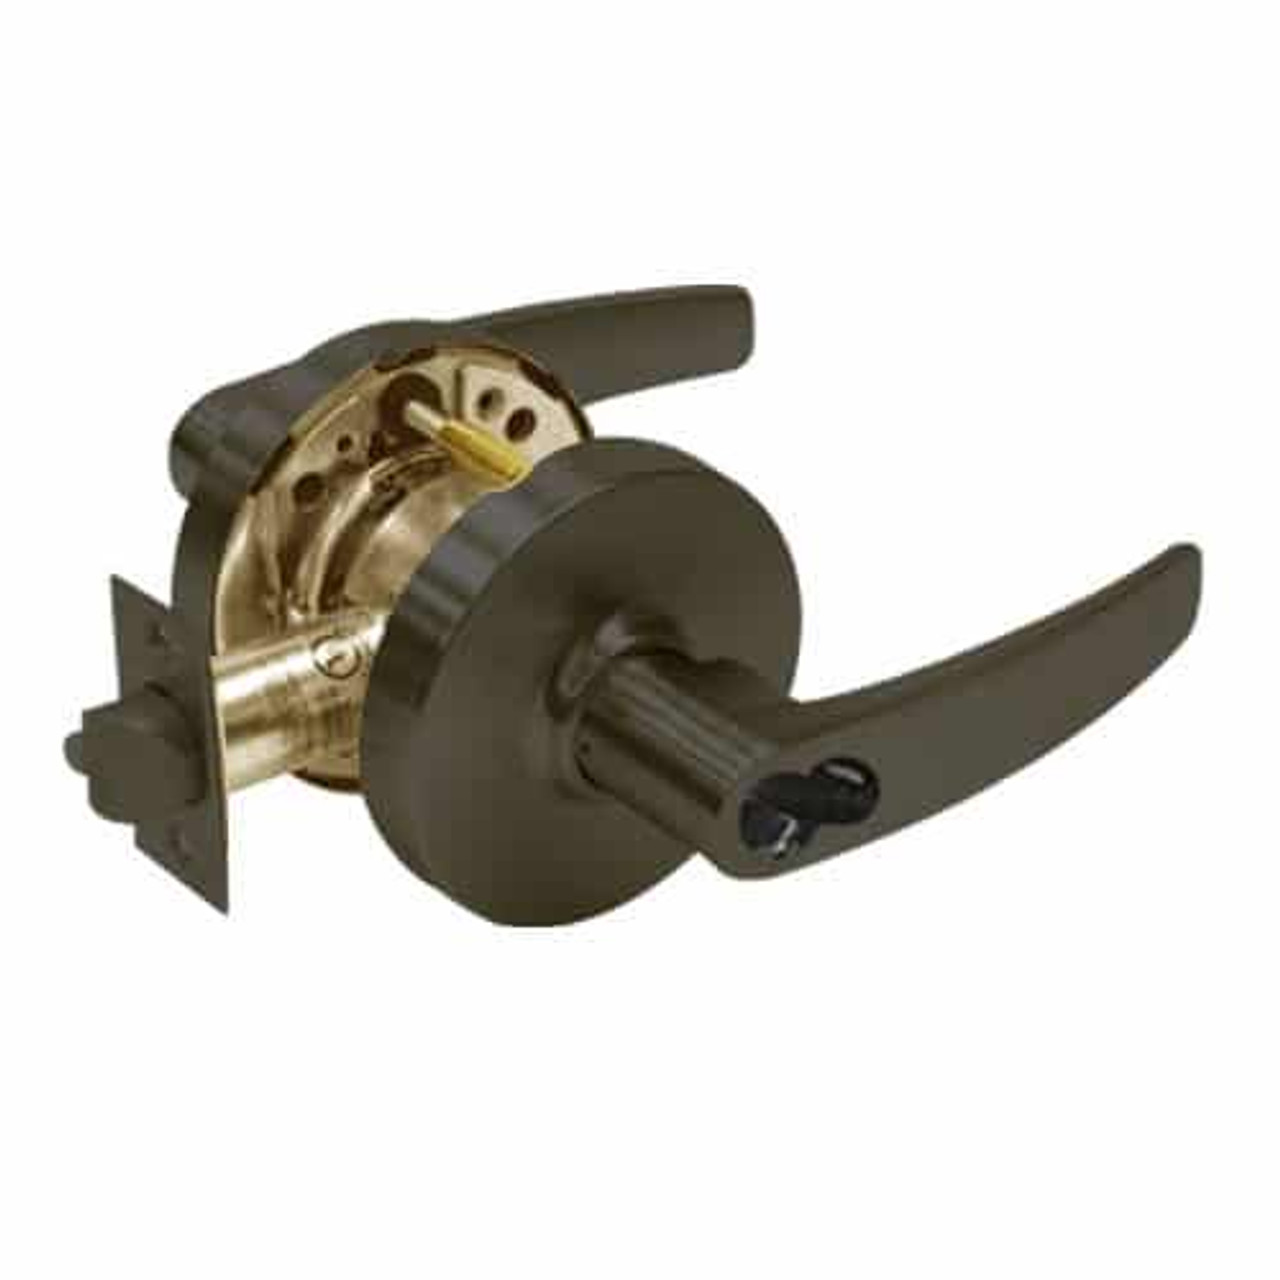 2870-10G16-LB-10B Sargent 10 Line Cylindrical Classroom Locks with B Lever Design and L Rose Prepped for SFIC in Oxidized Dull Bronze